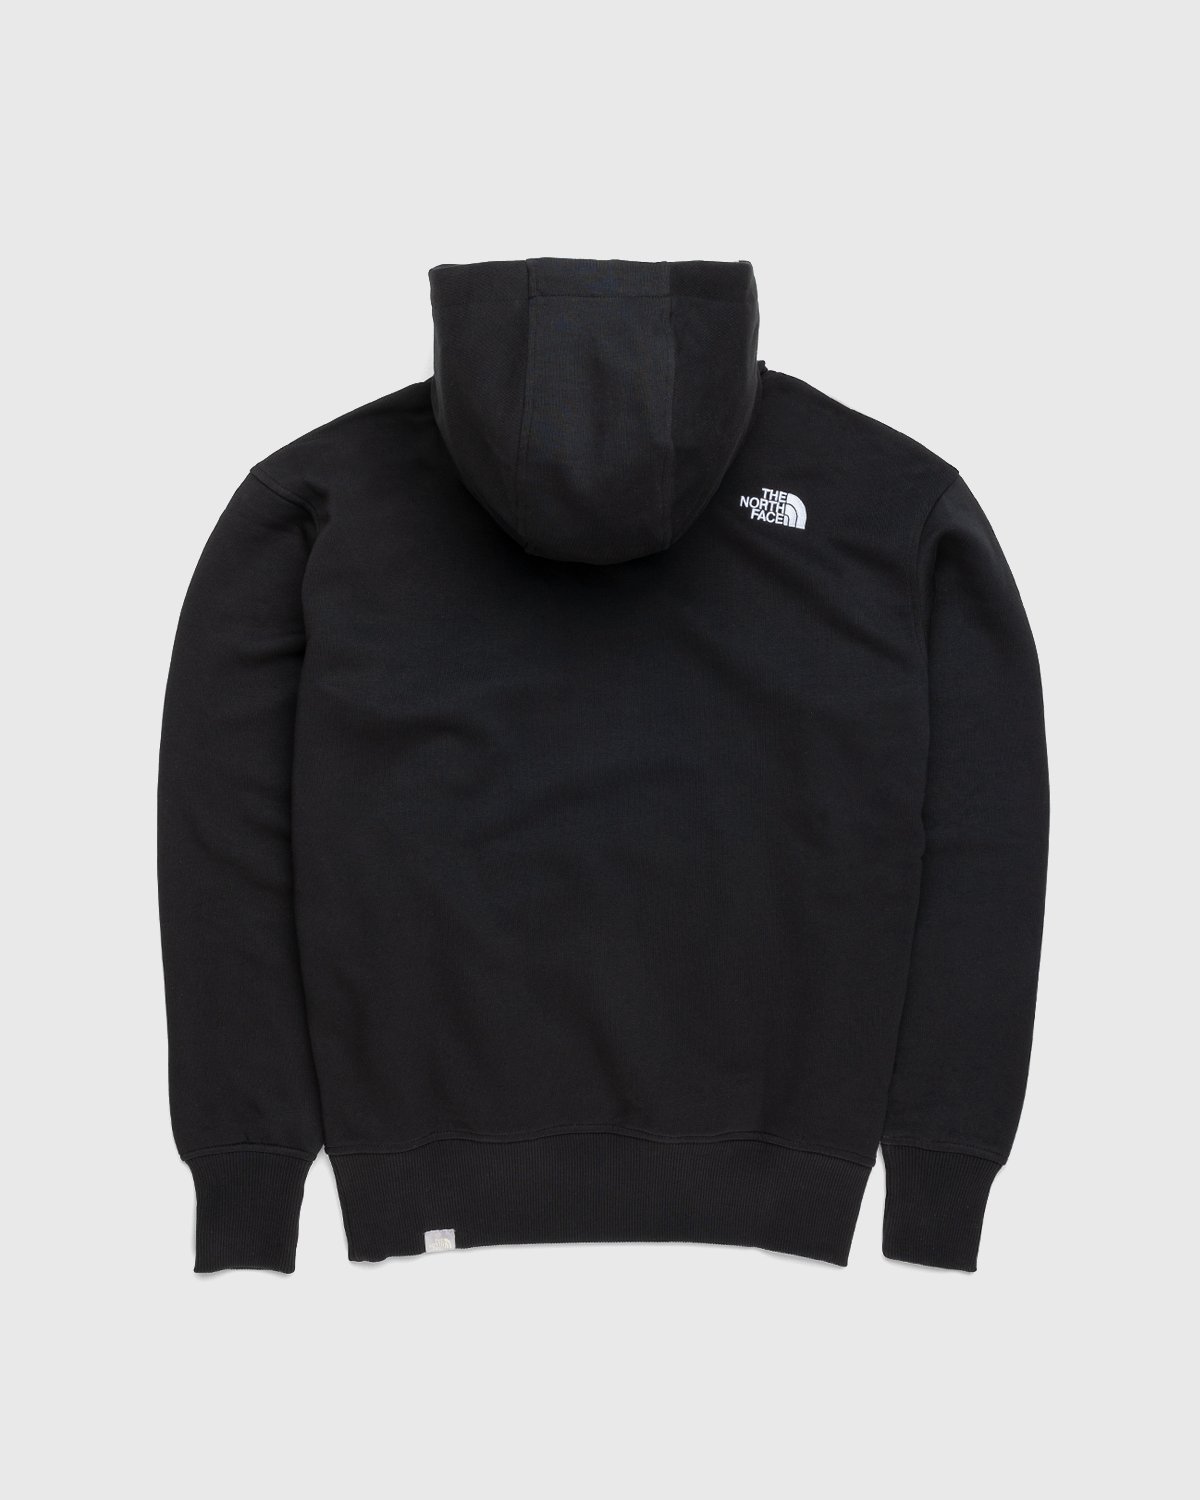 The North Face - Oversized Essential Hoodie Black - Clothing - Black - Image 2